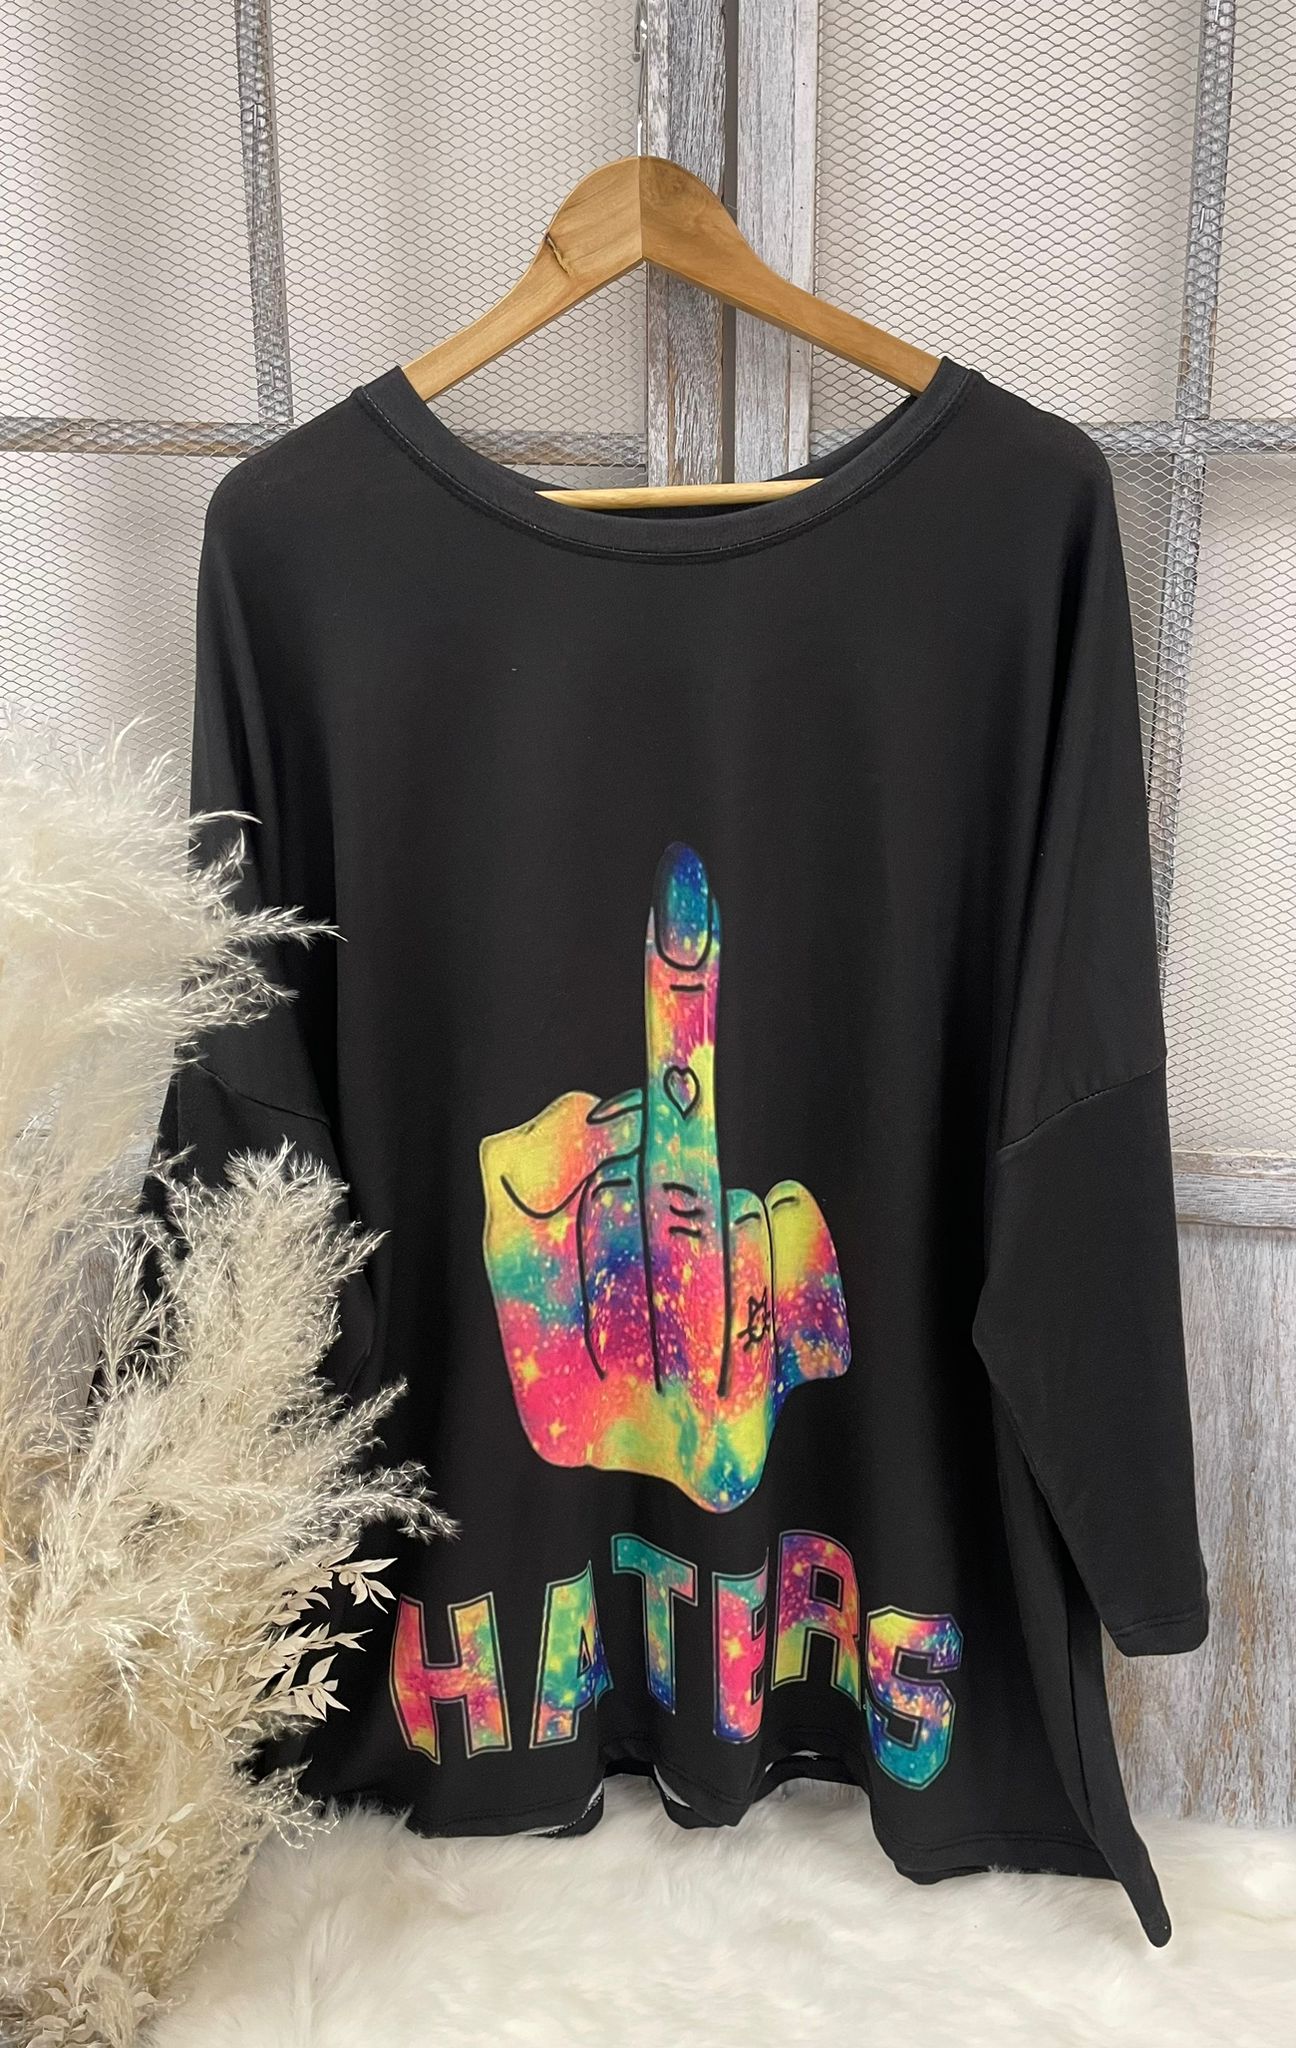 Gr. 50 - 54 Shirt "Haters"